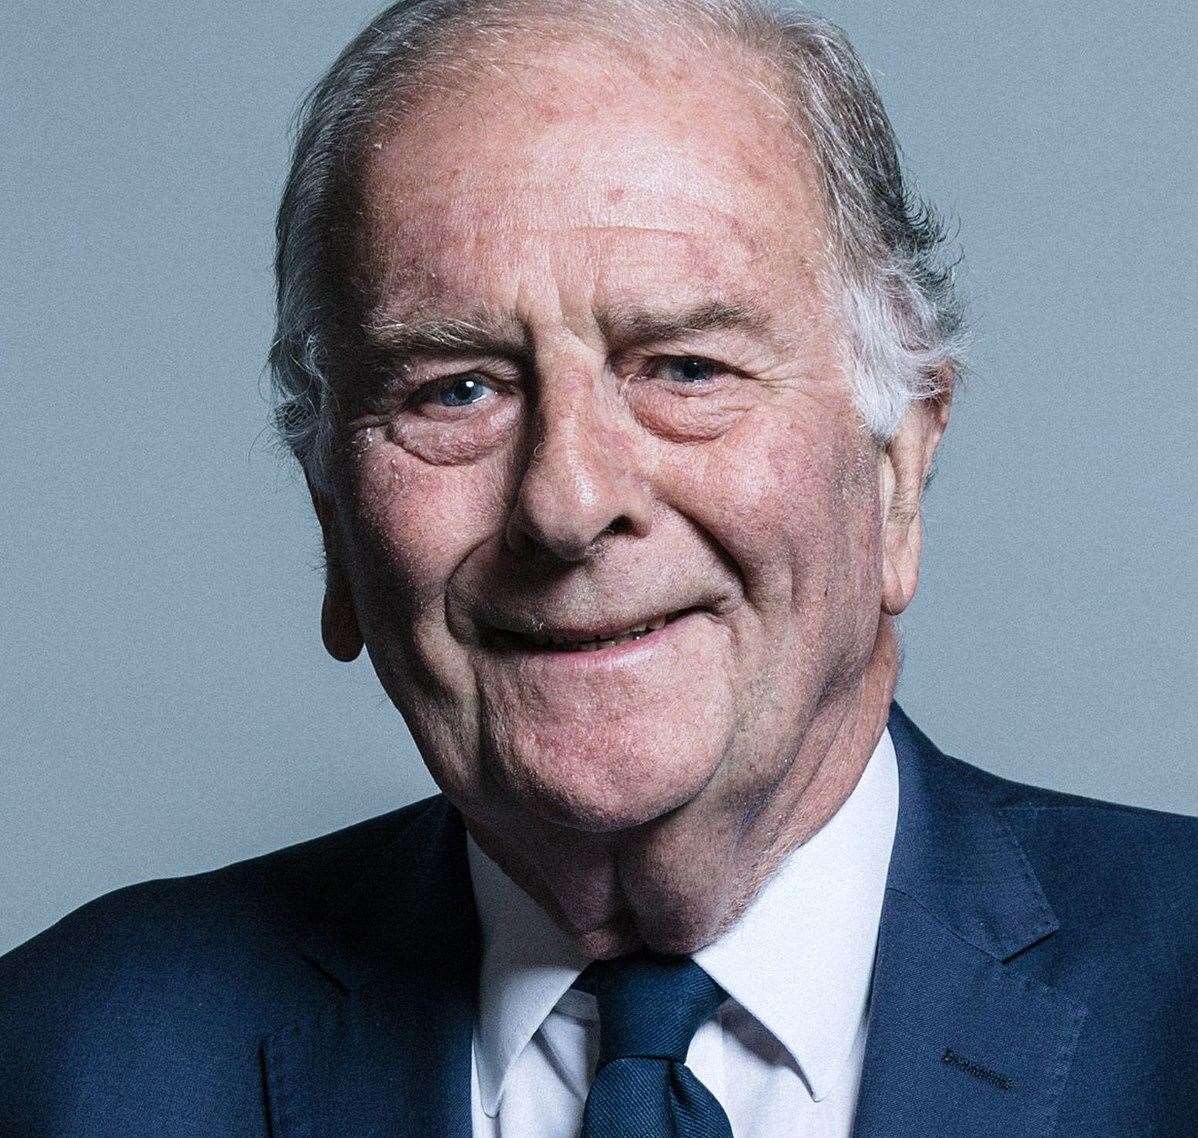 North Thanet MP Sir Roger Gale has urged Boris Johnson to apologise